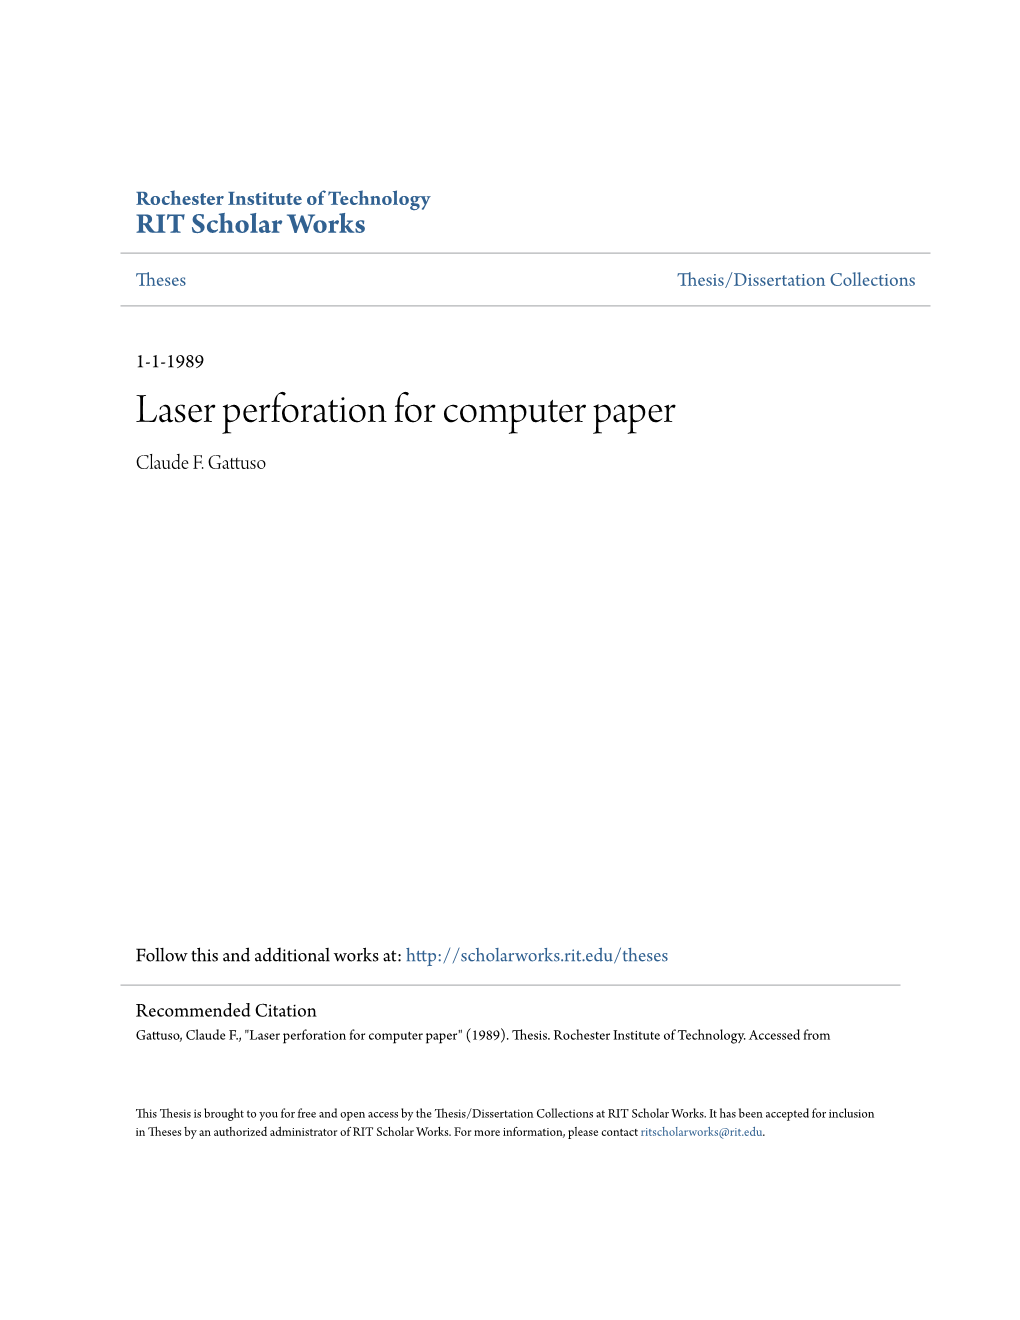 Laser Perforation for Computer Paper Claude F